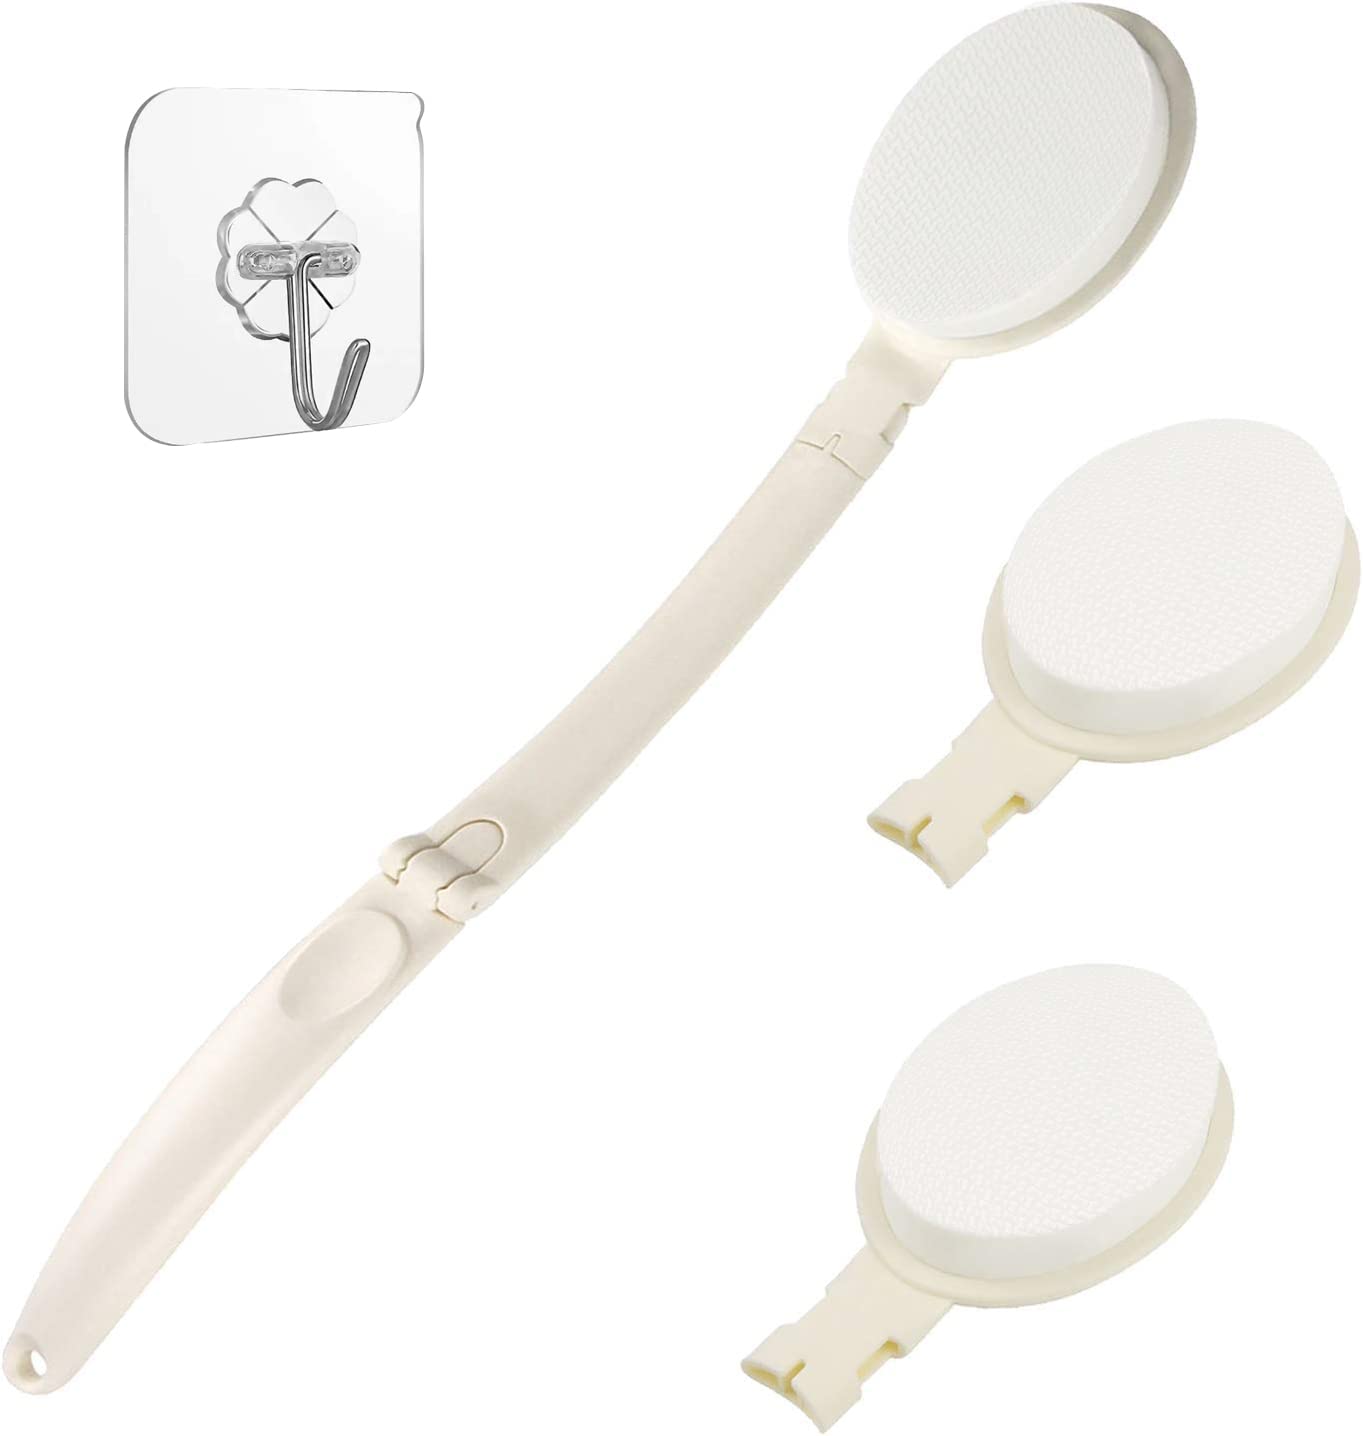 LFJ Lotion Applicator with Long Curved Handle for Back,Legs,Feet Self Application of Sunscreen, Sunless Self-Tanning, Skin Cream, Acne